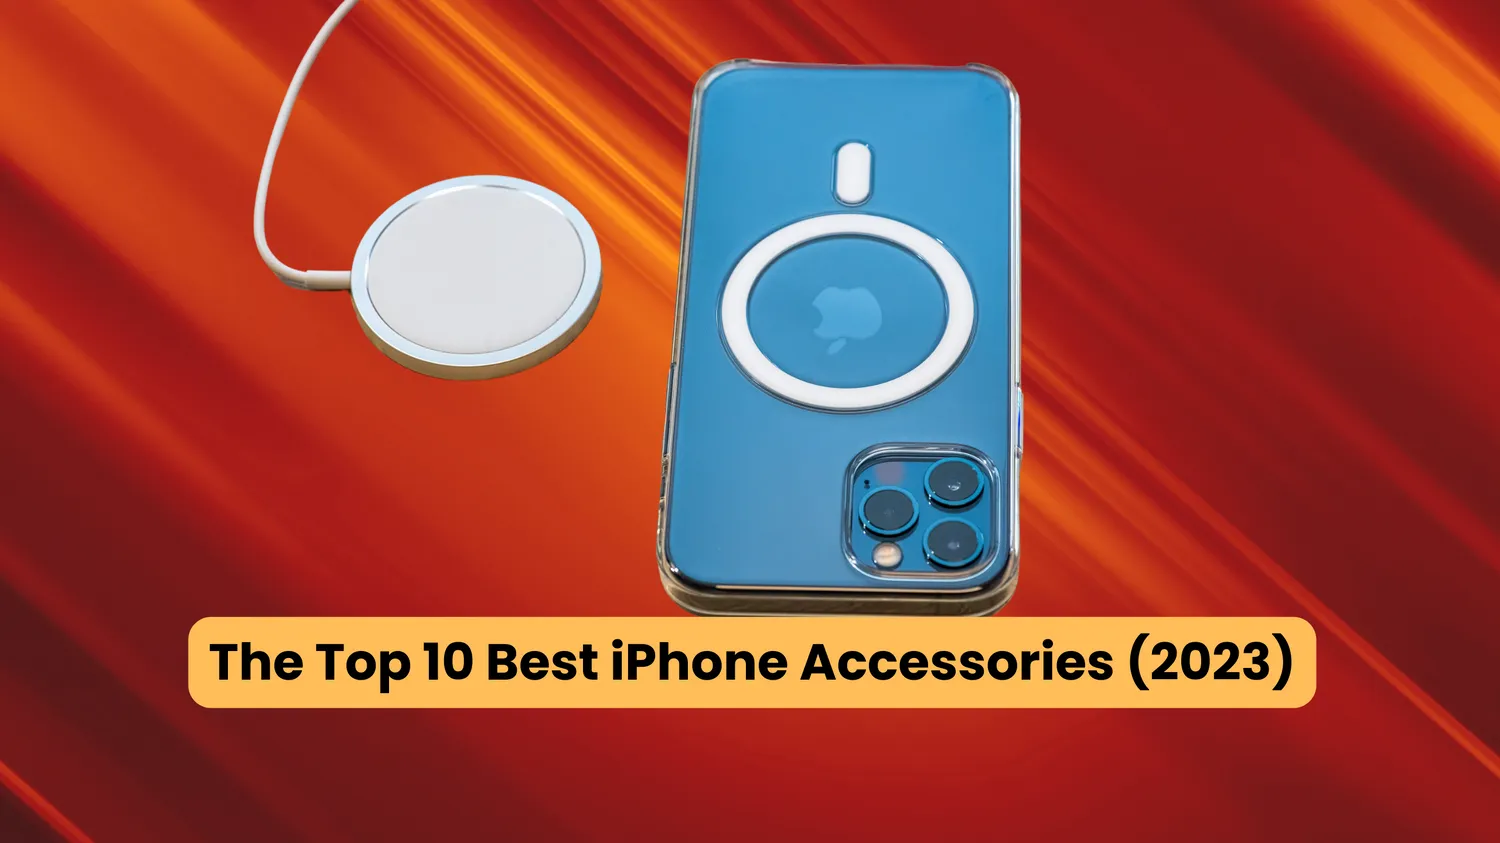 The Top 10 Best iPhone Accessories 2023 image